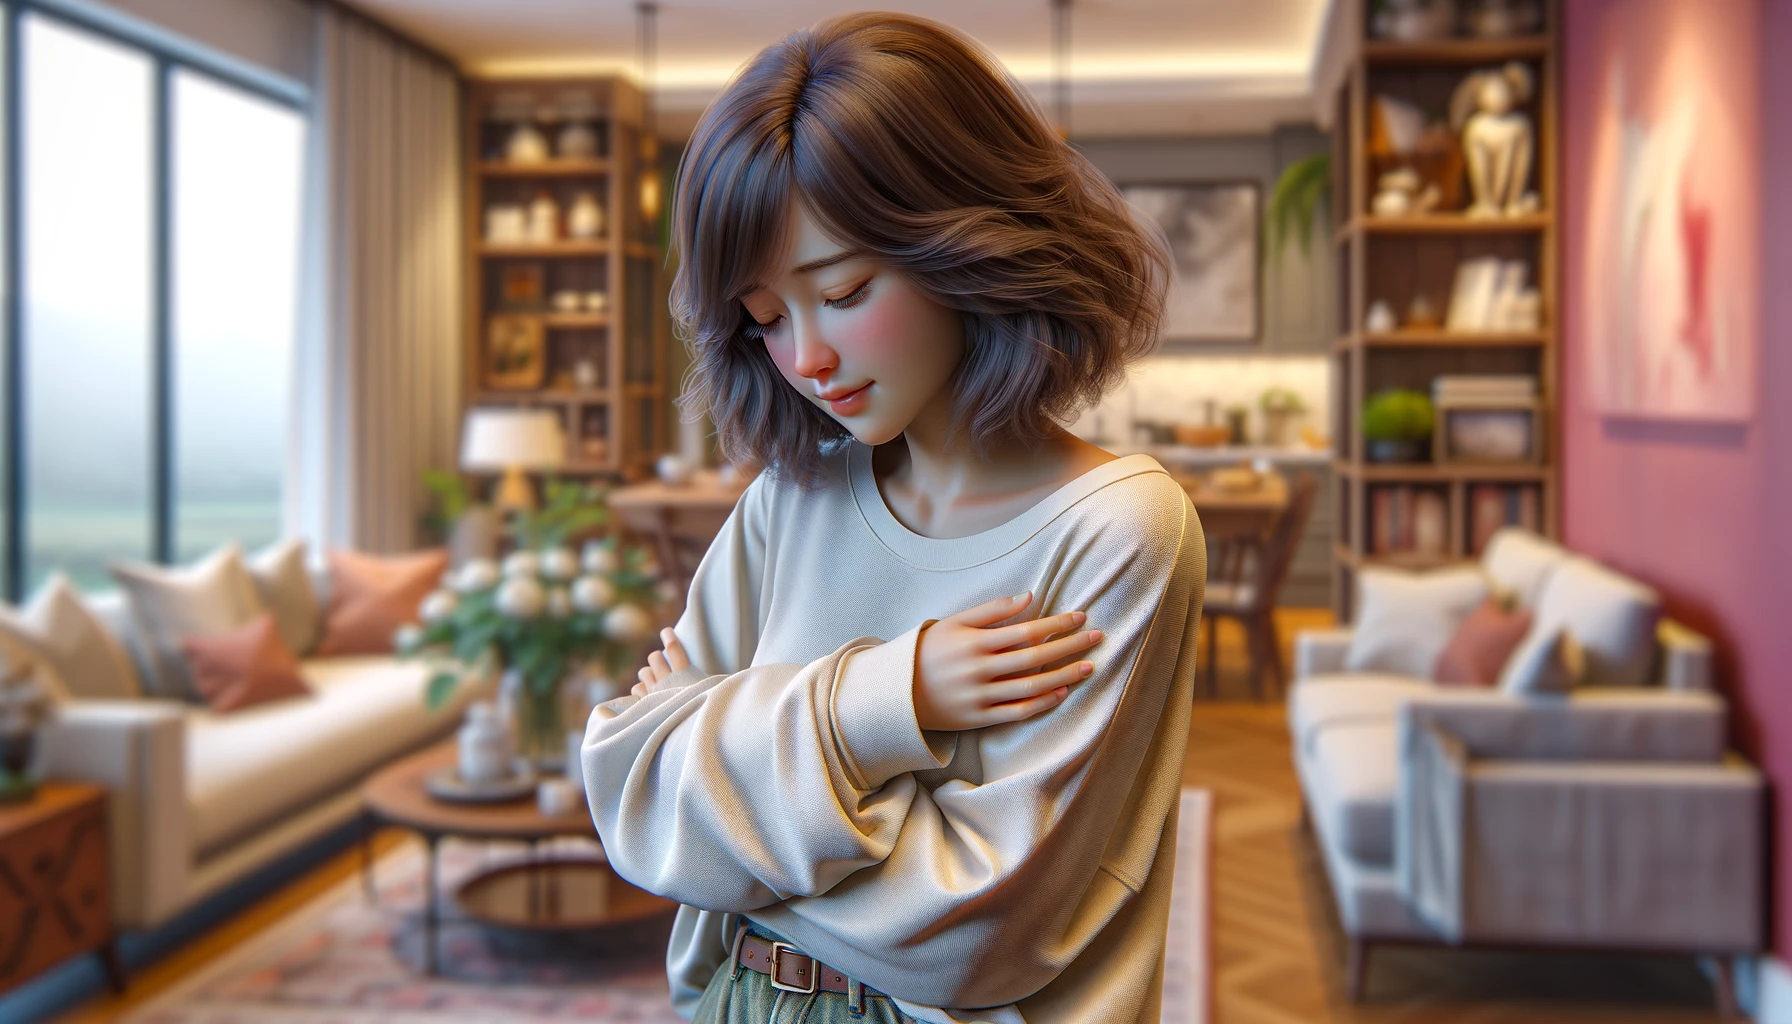 General 1792x1024 AI art living rooms women indoors indoors blurred blurry background short hair digital art makeup closed mouth parted lips long sleeves shoulder length hair lamp women flowers cup couch pillow Asian curtains sweatshirts table looking below bookshelves shelves